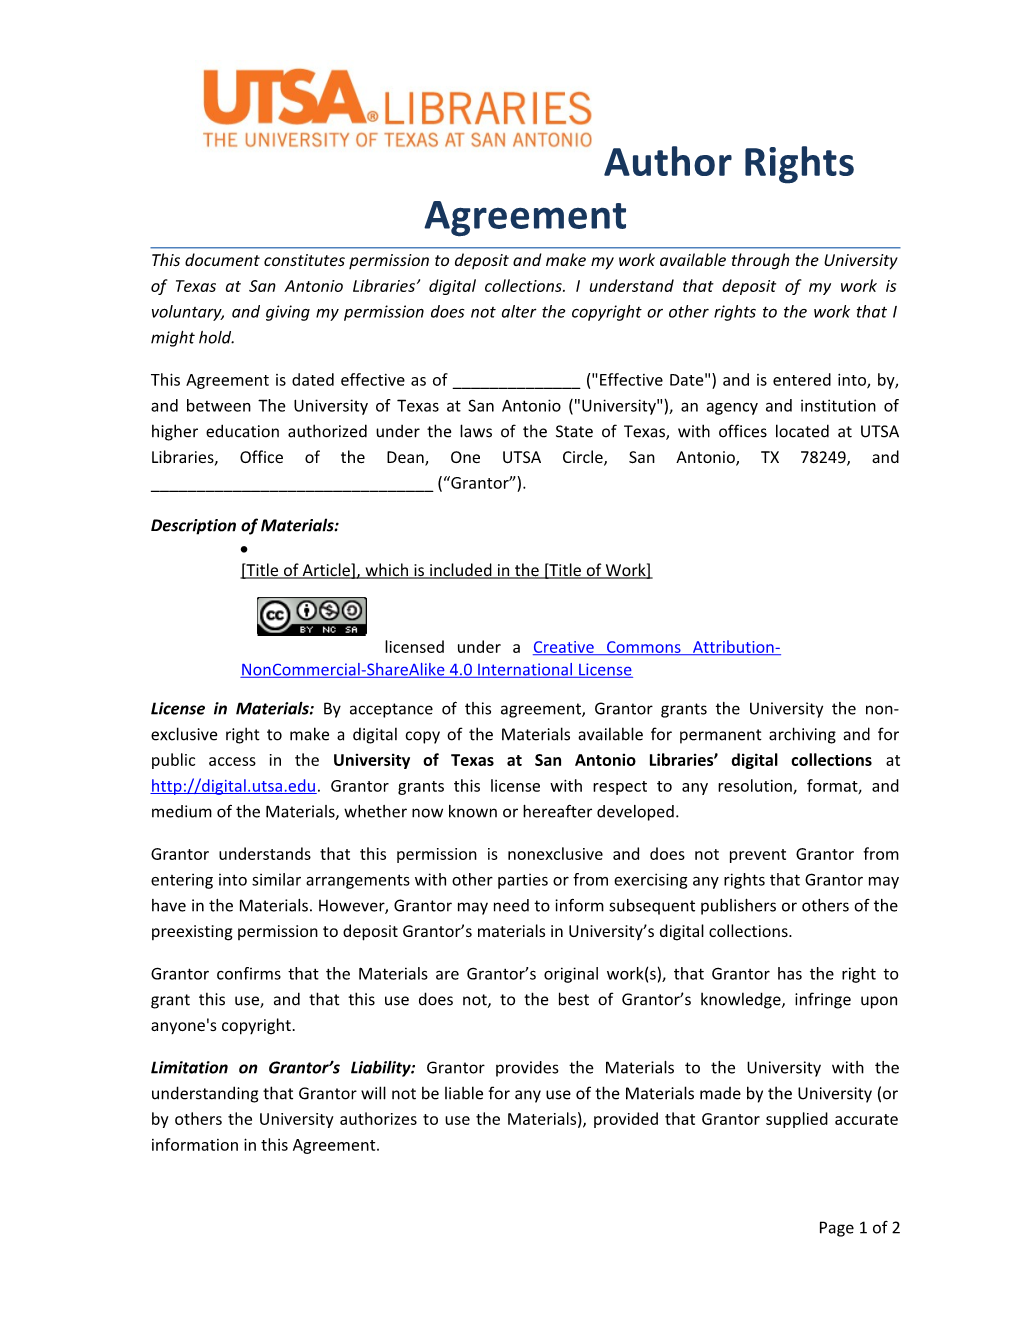 Author Rights Agreement